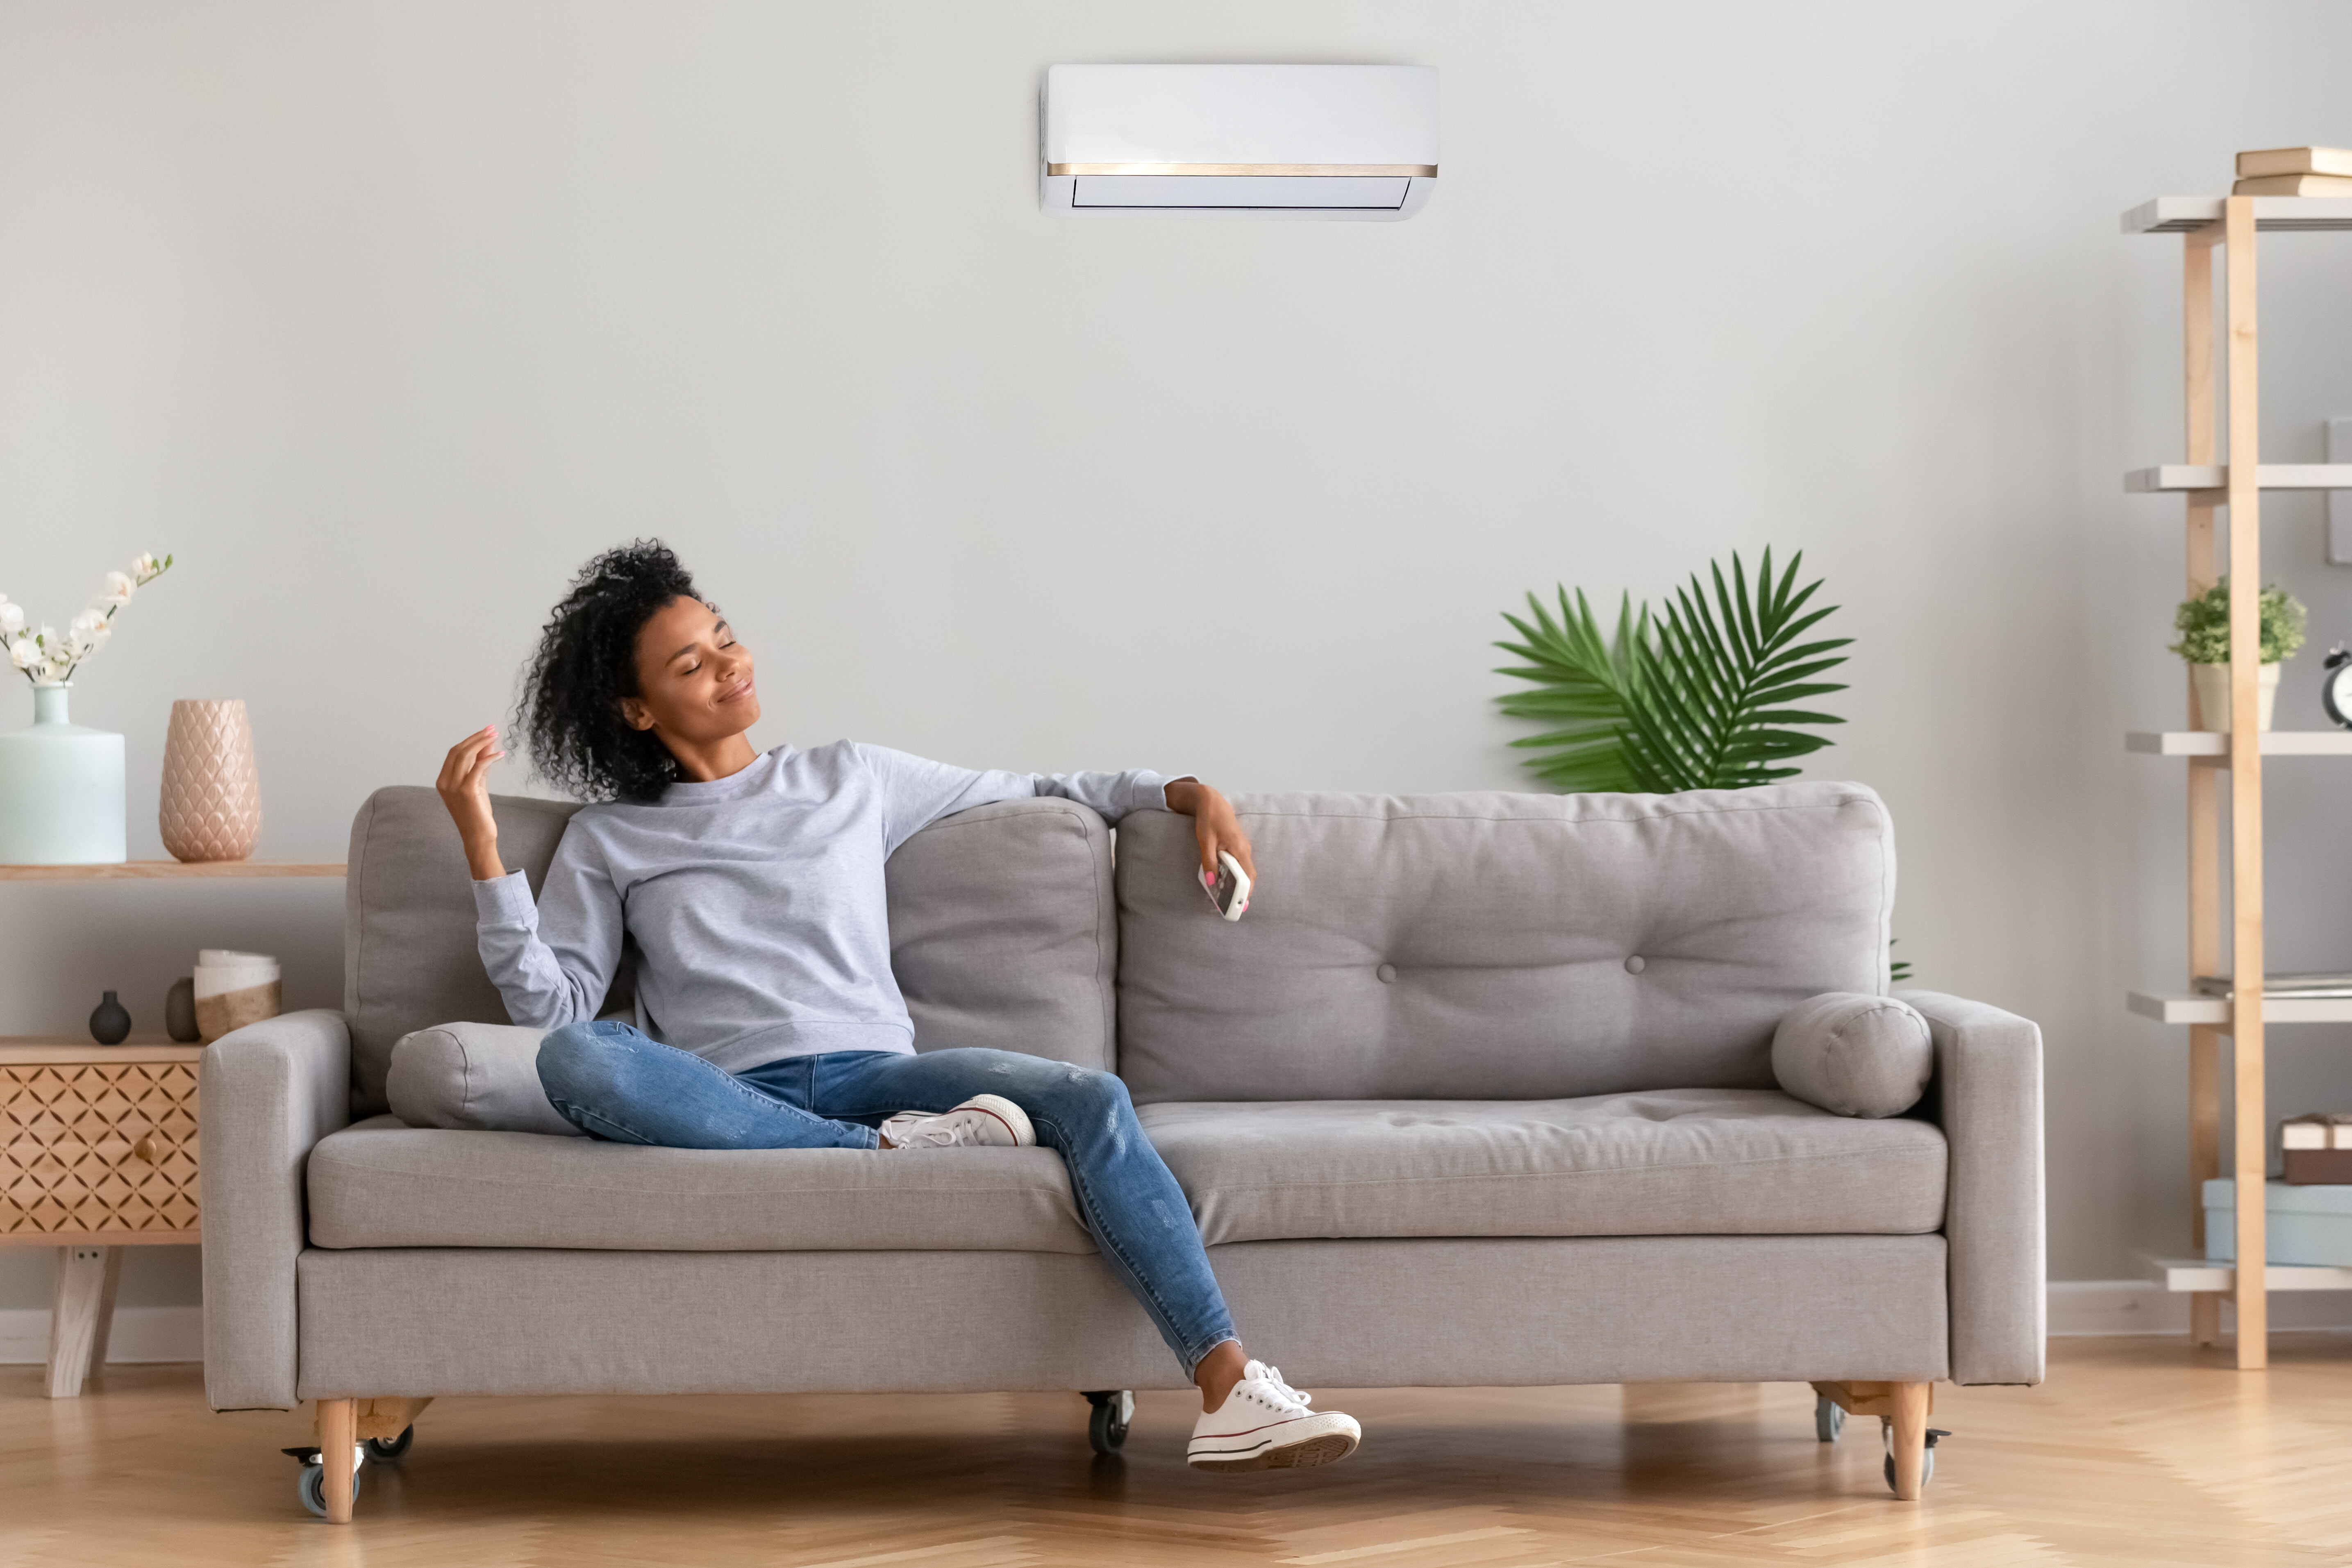 A woman relaxes in her living room while her split system air conditioner keeps the room cool.